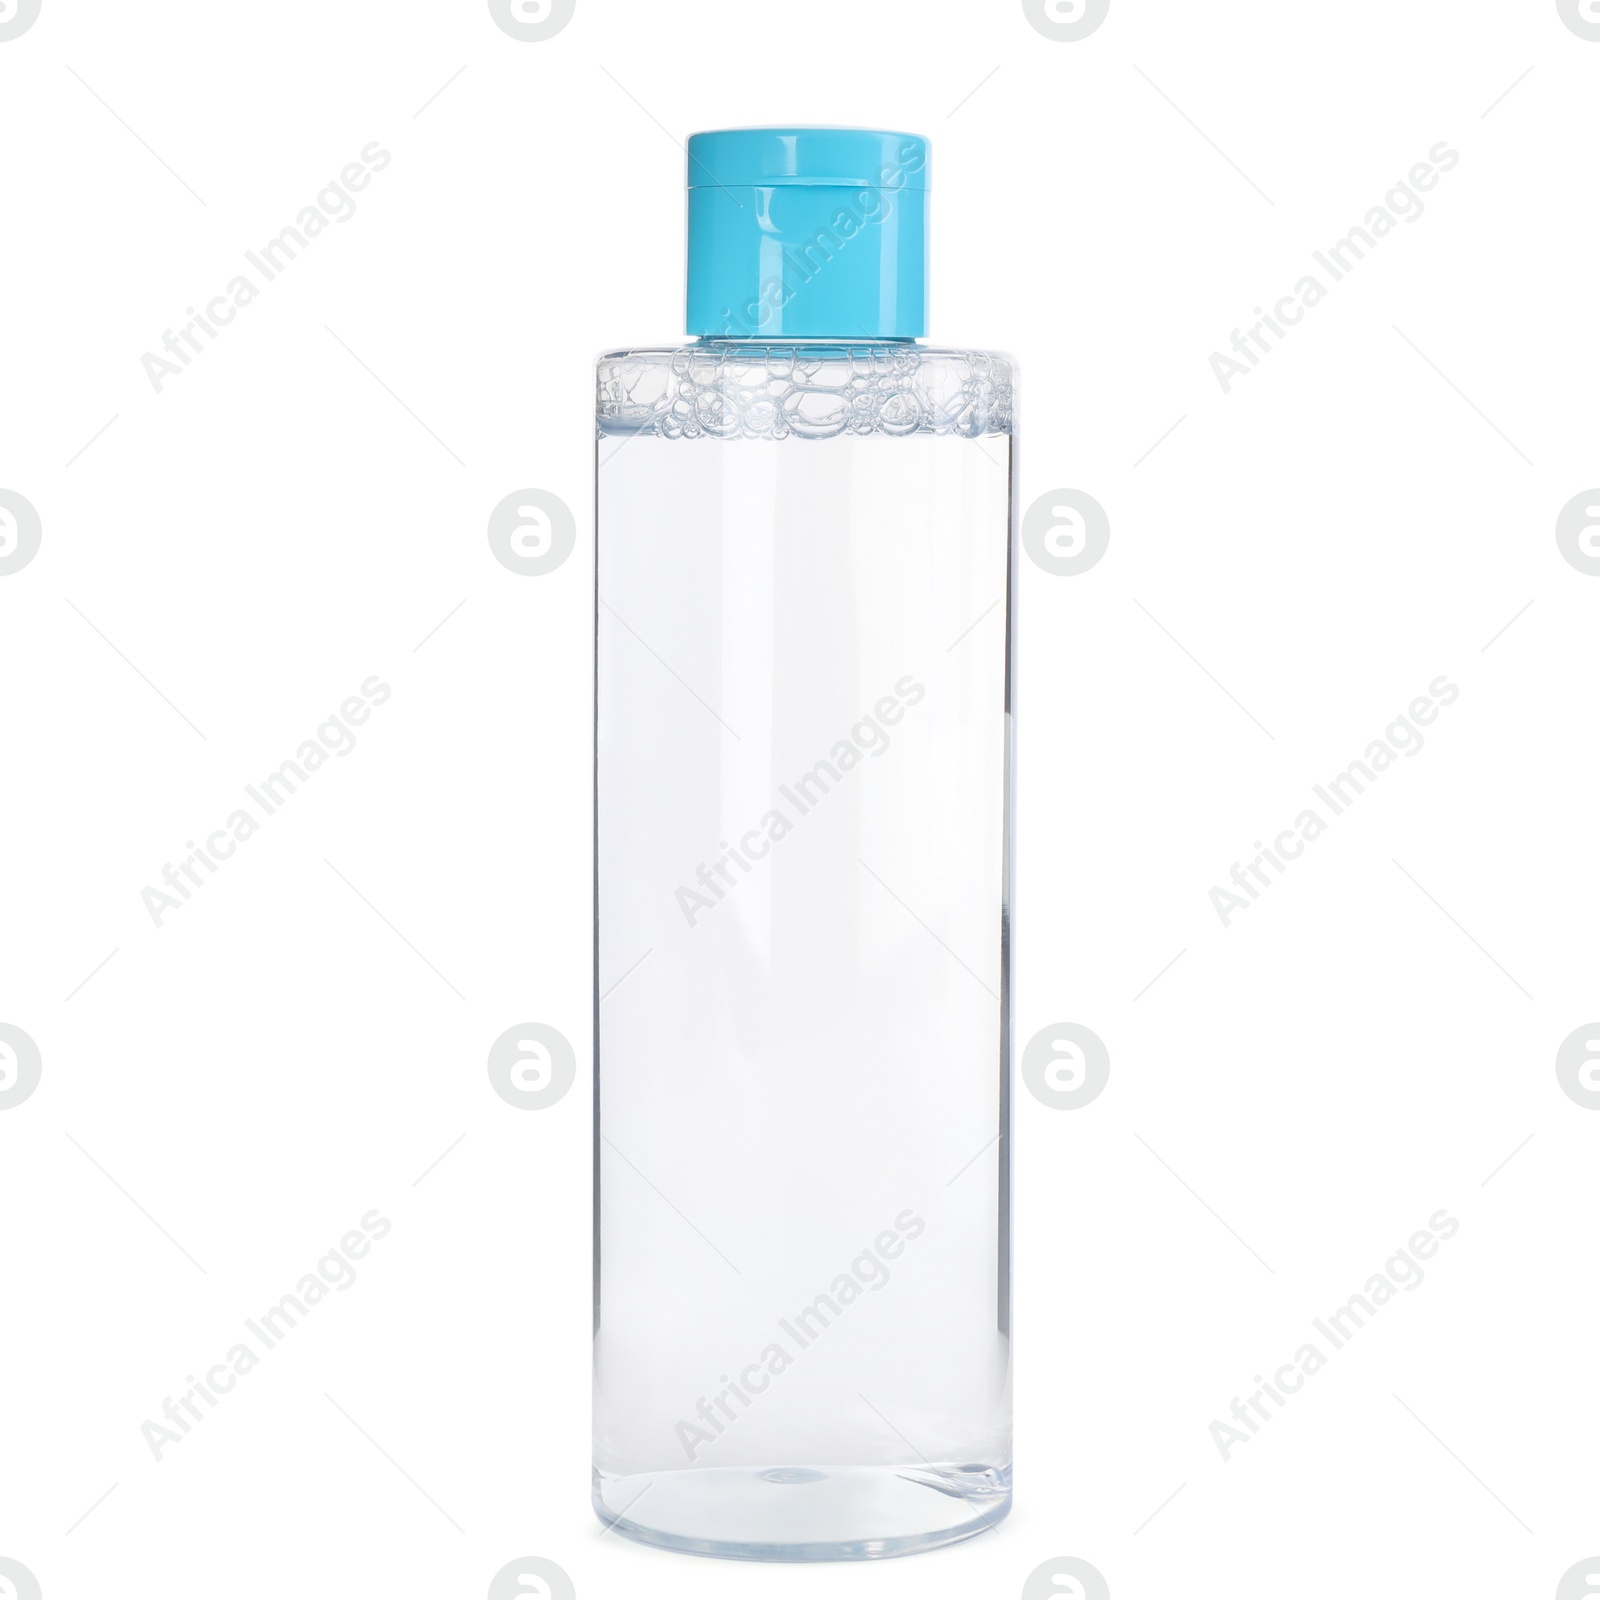 Photo of Bottle of micellar cleansing water isolated on white